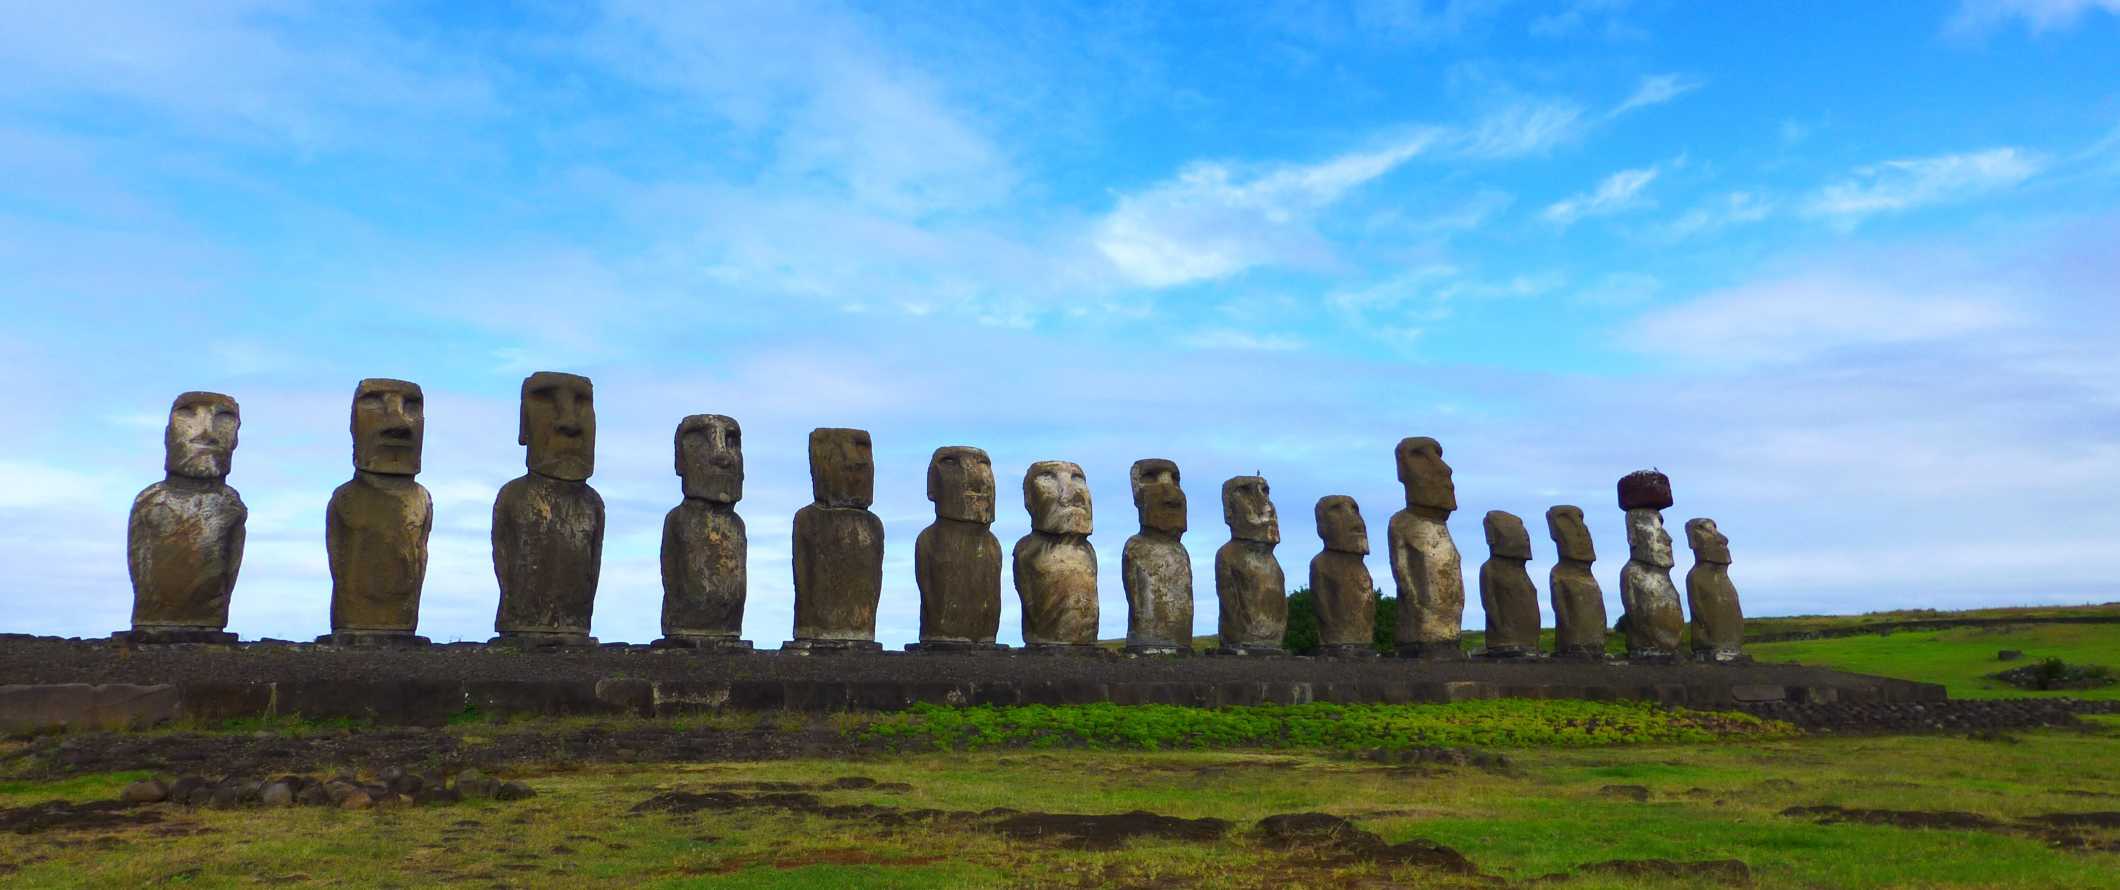 Giant stone heads lined up next to each other on Easter Island off the coast of Chile